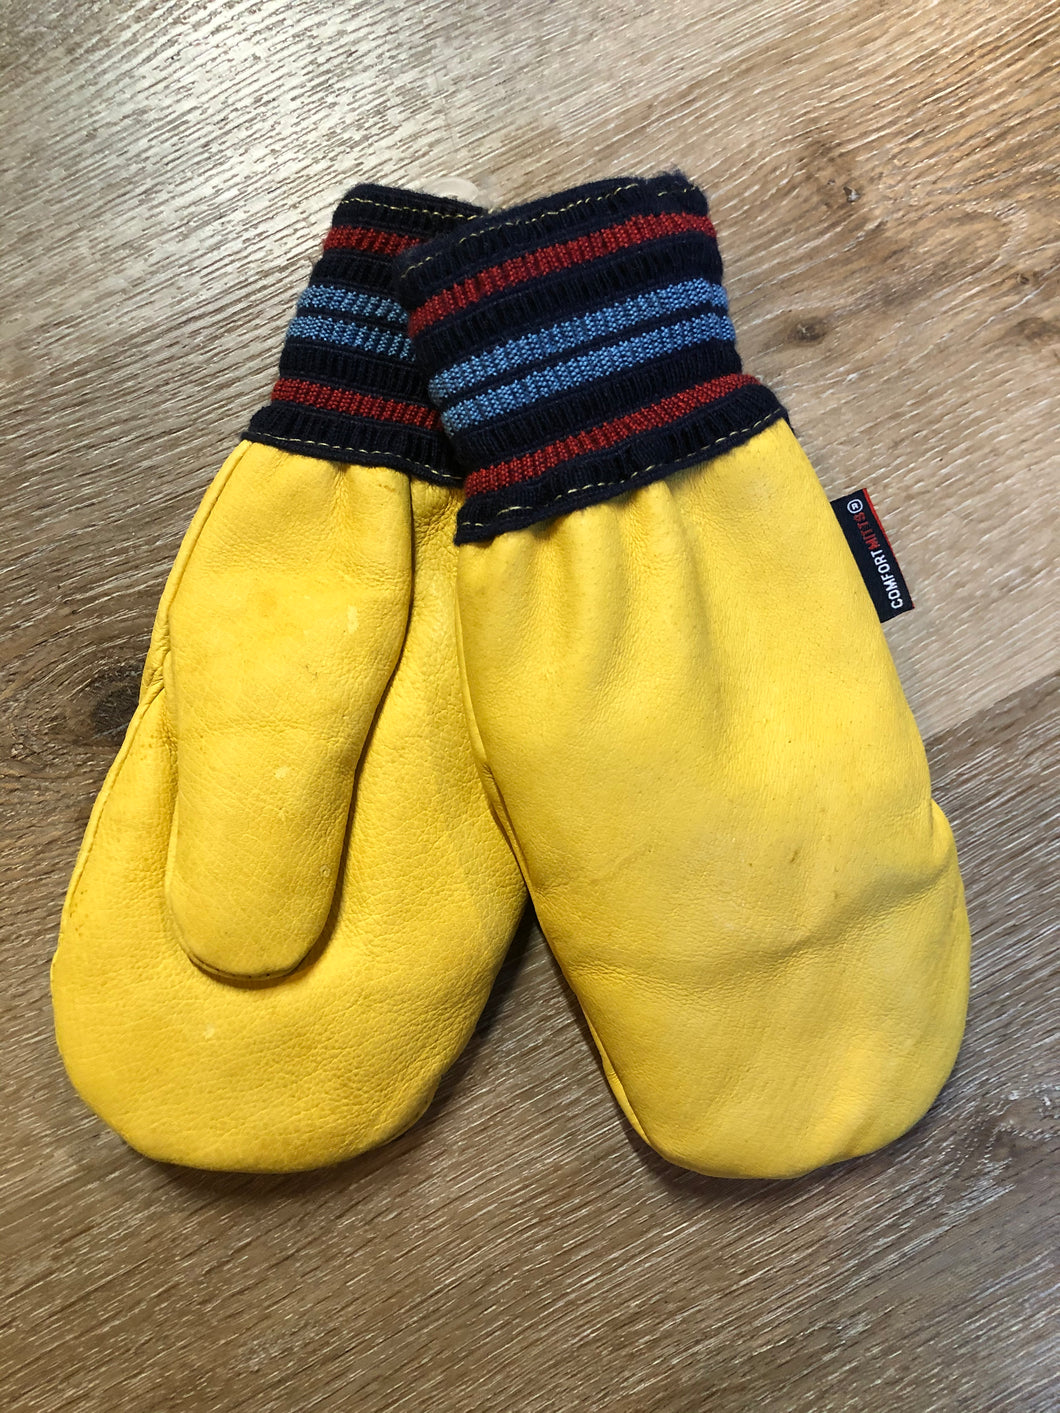 Kingspier Vintage - Vintage deadstock comfort hockey leather mitts in yellow with blue and red striped knit cuff and wool lining. Size small.